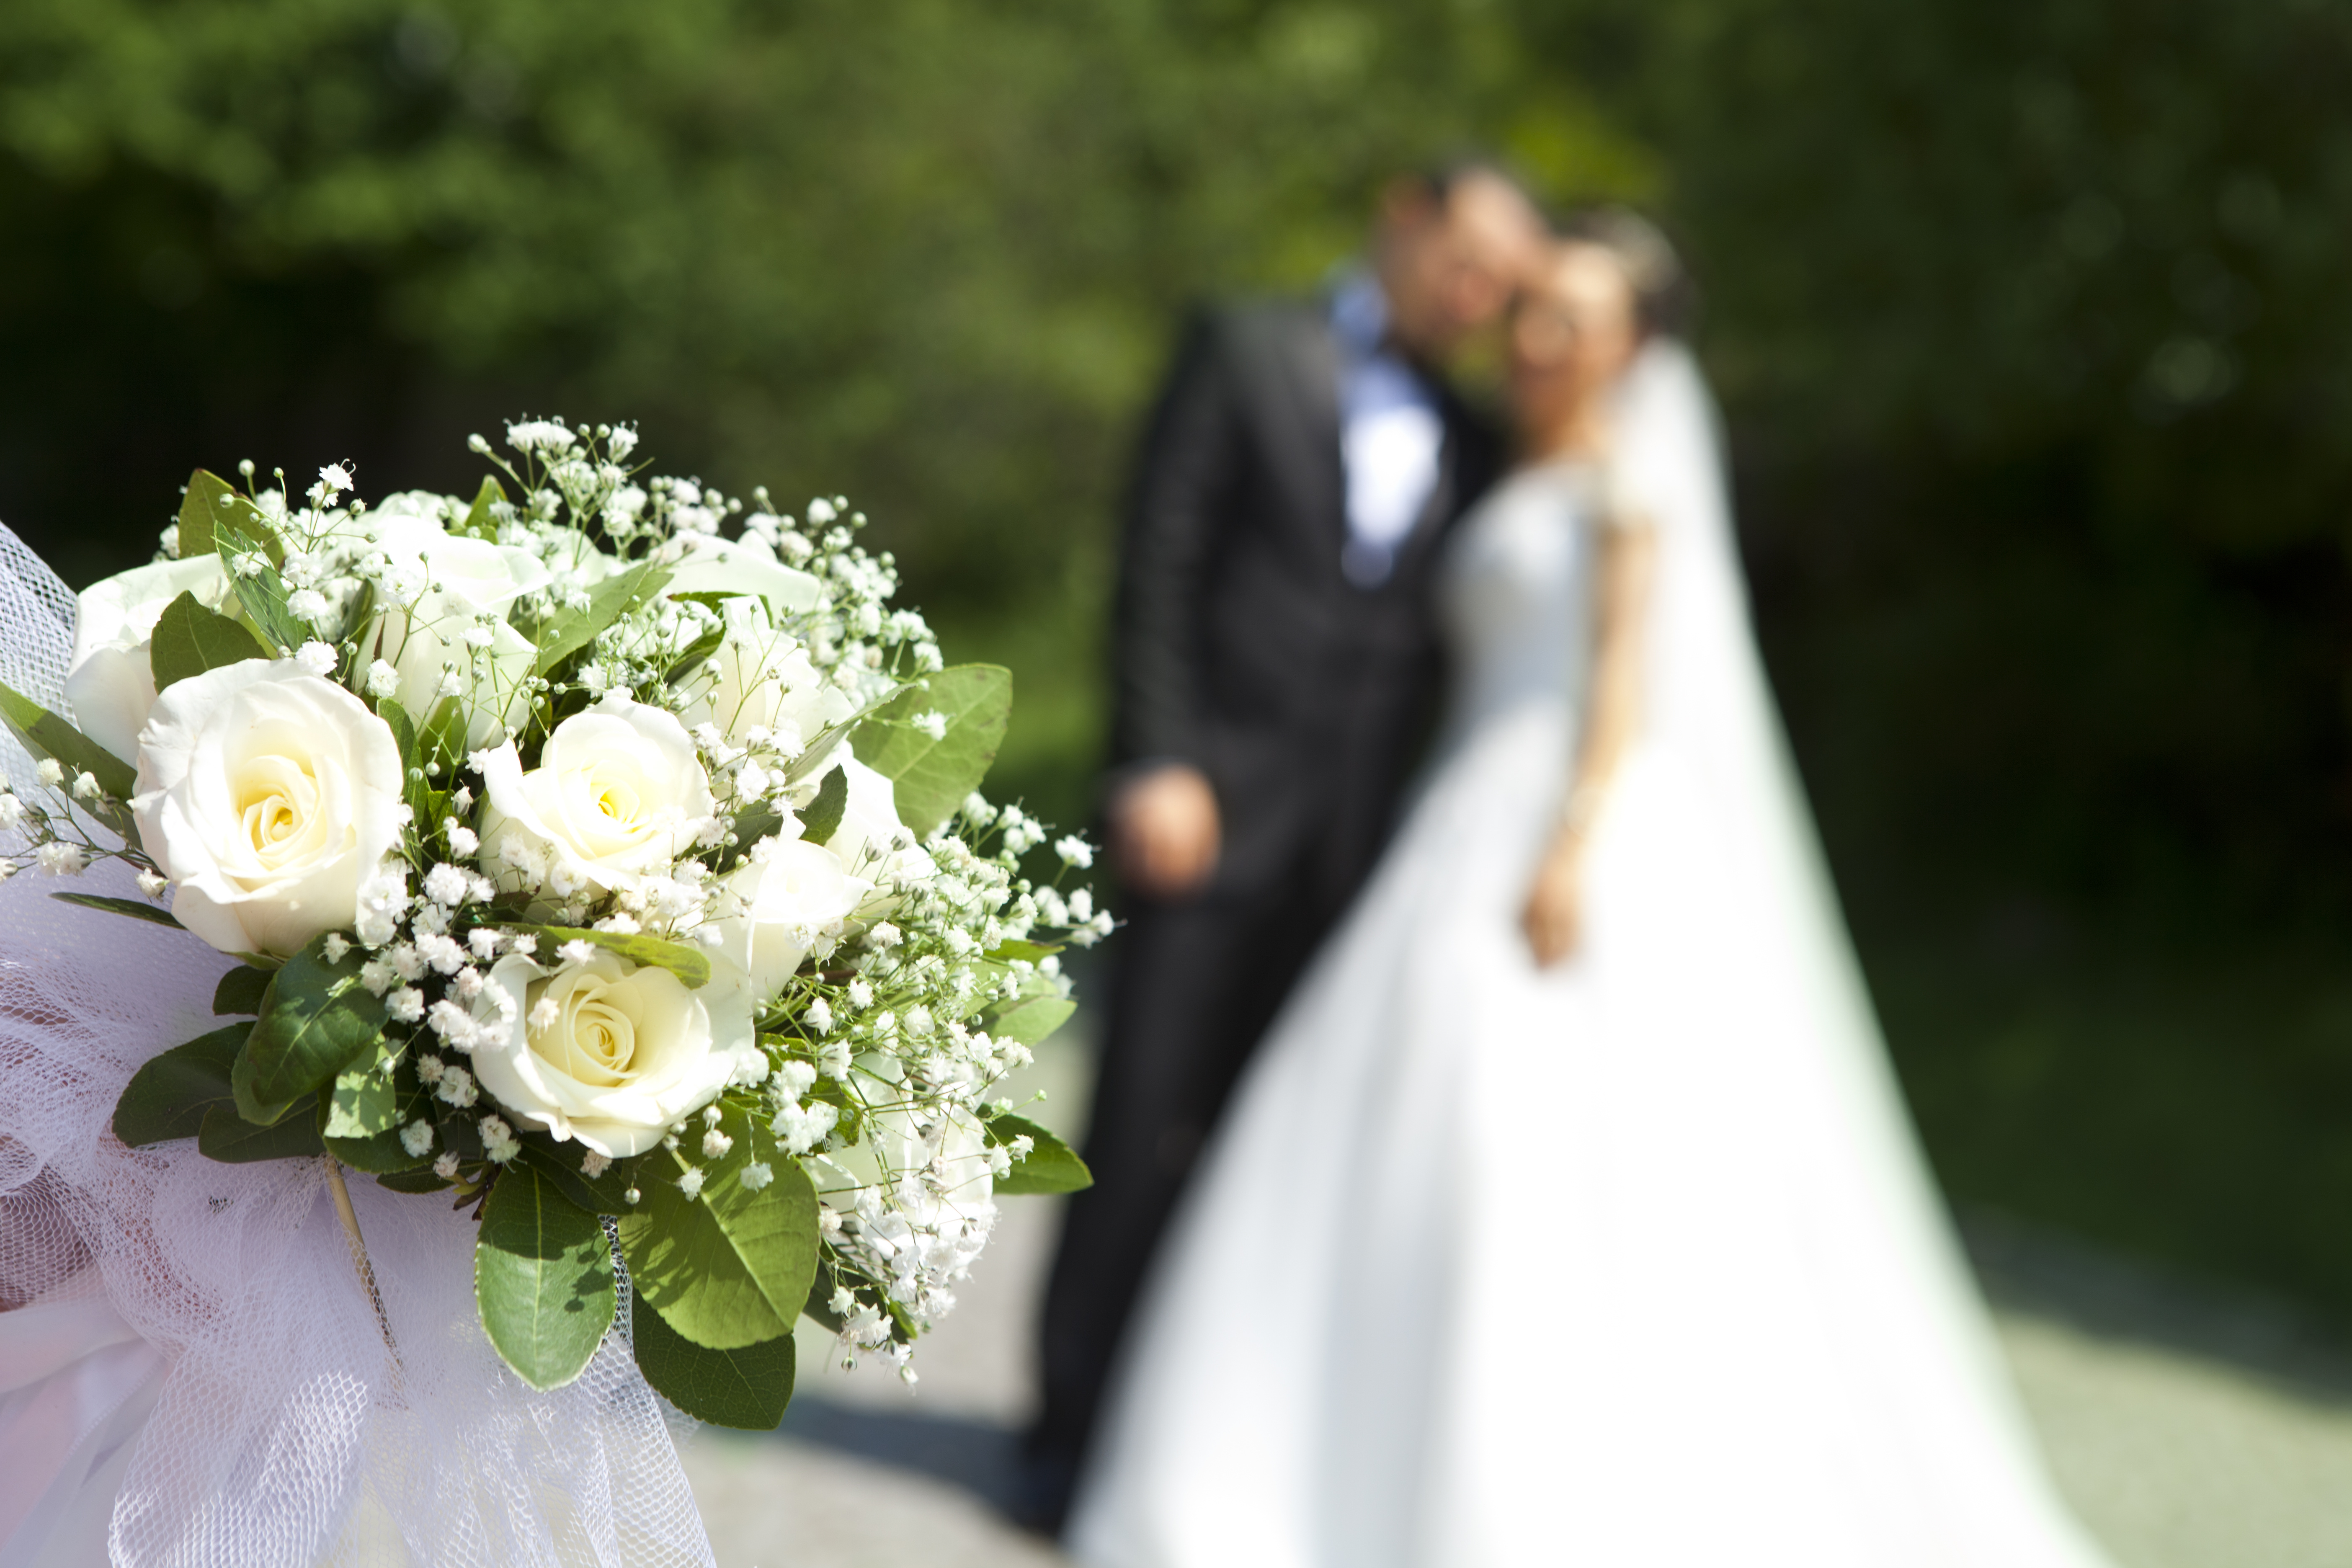 How To Have A Hearing Accessible Wedding Day